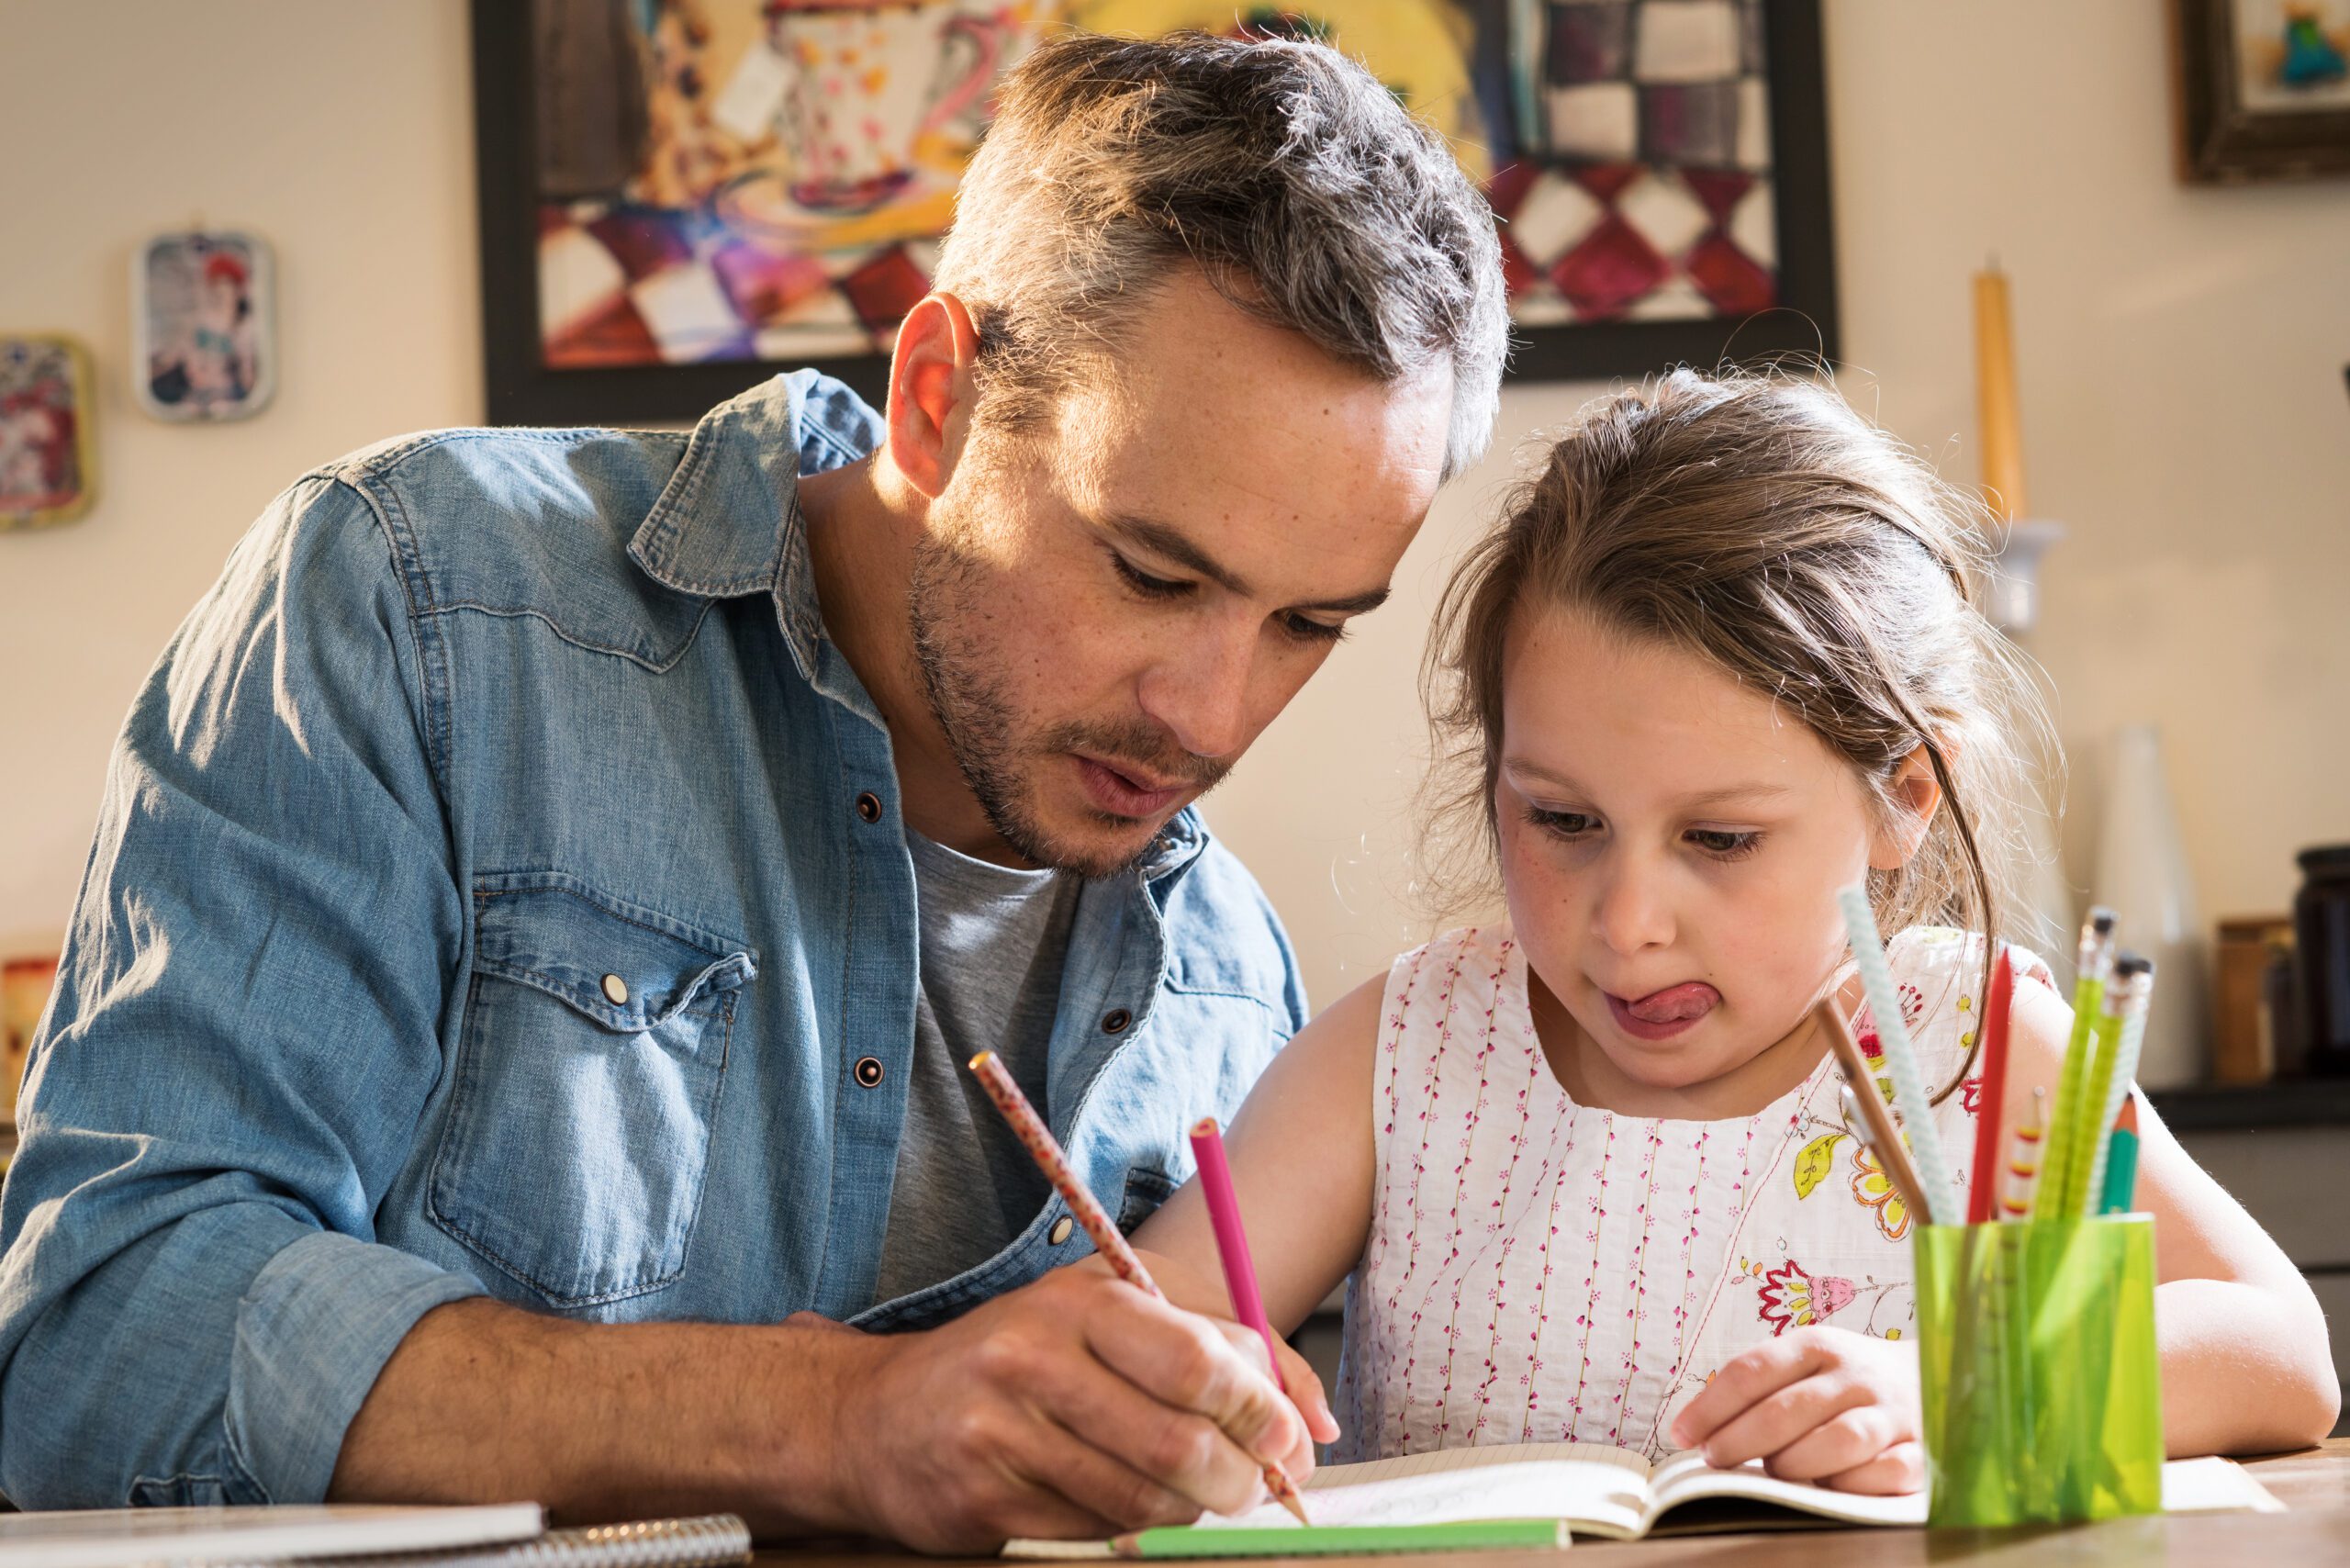 A father helps his daughter with homework.